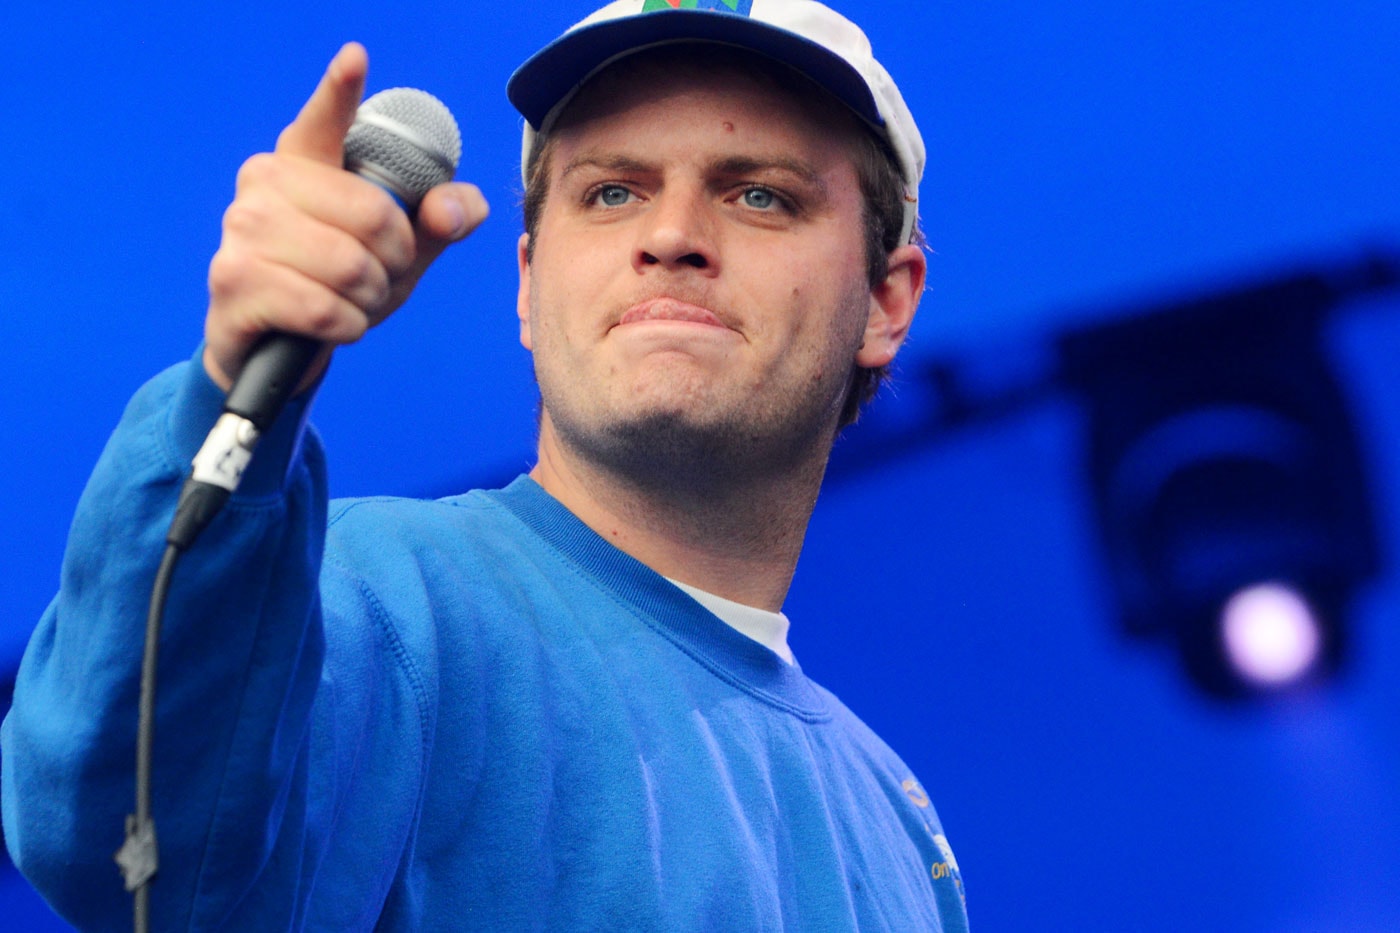 Mac DeMarco's 'Star Wars: The Force Awakens' Review is the Only Star Wars Review You'll Need